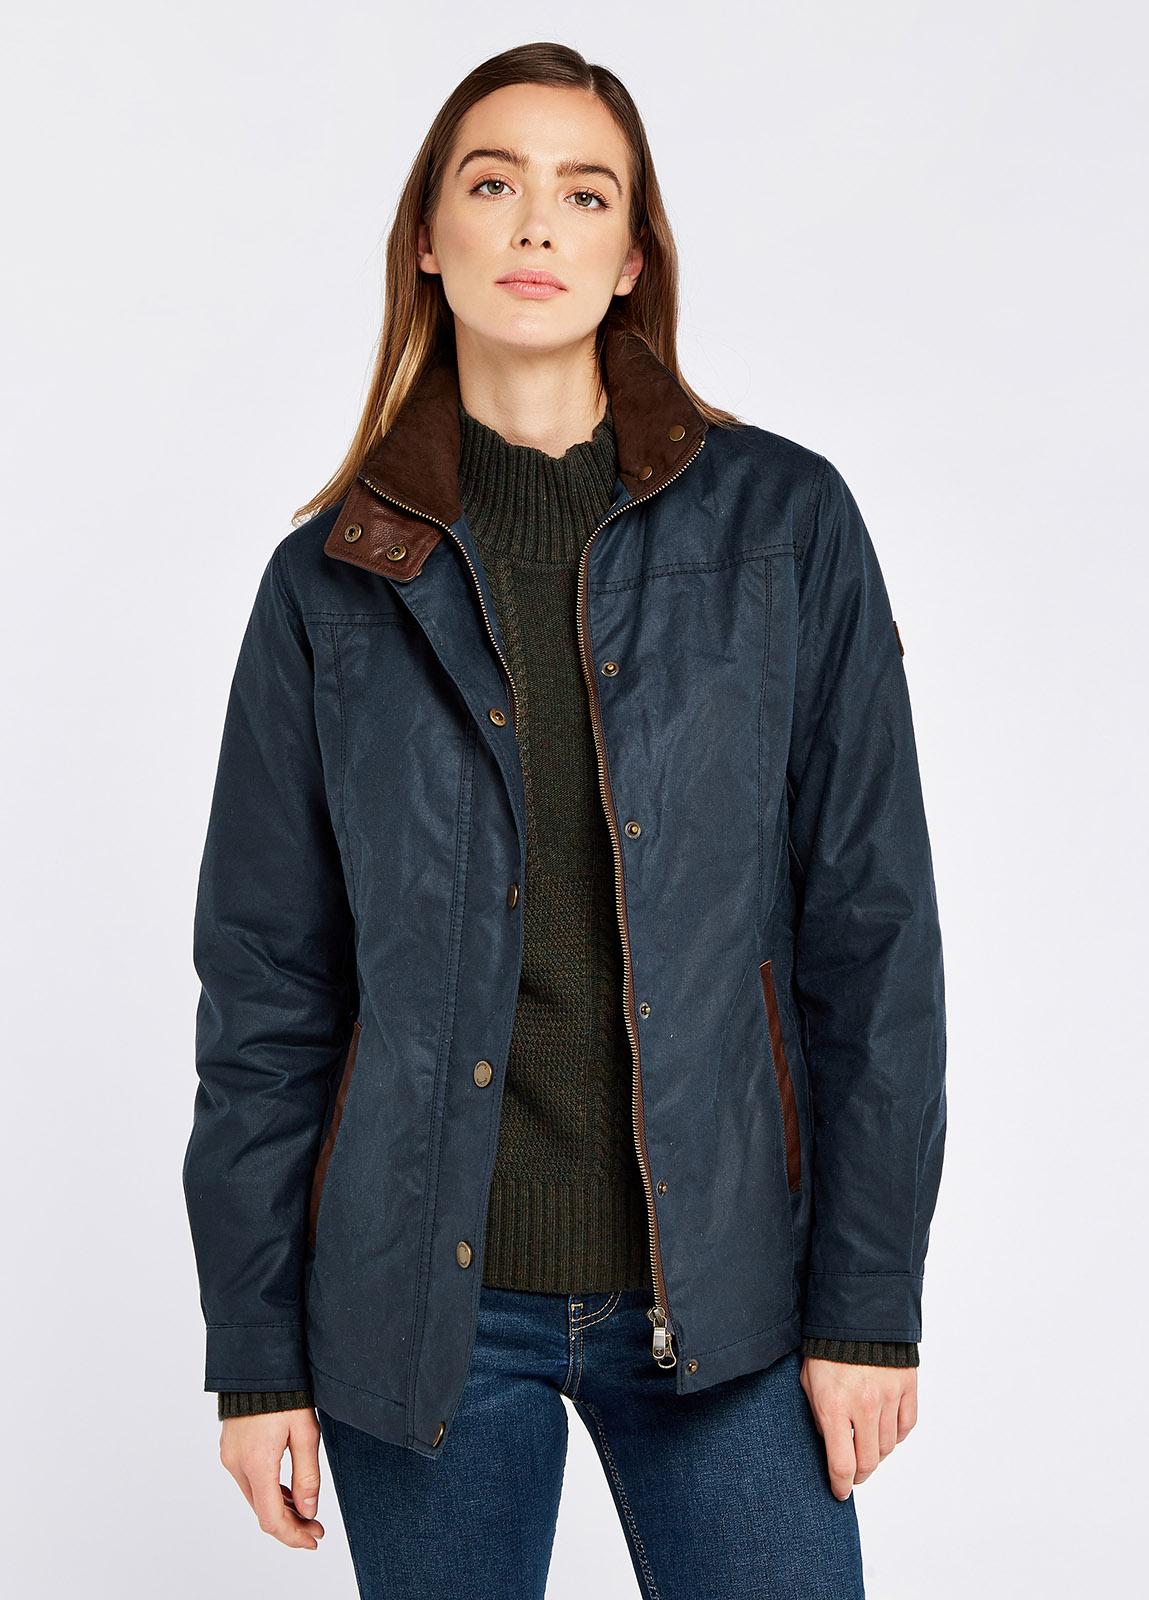 Jackets & Vests, Clothing, Clearance, Women